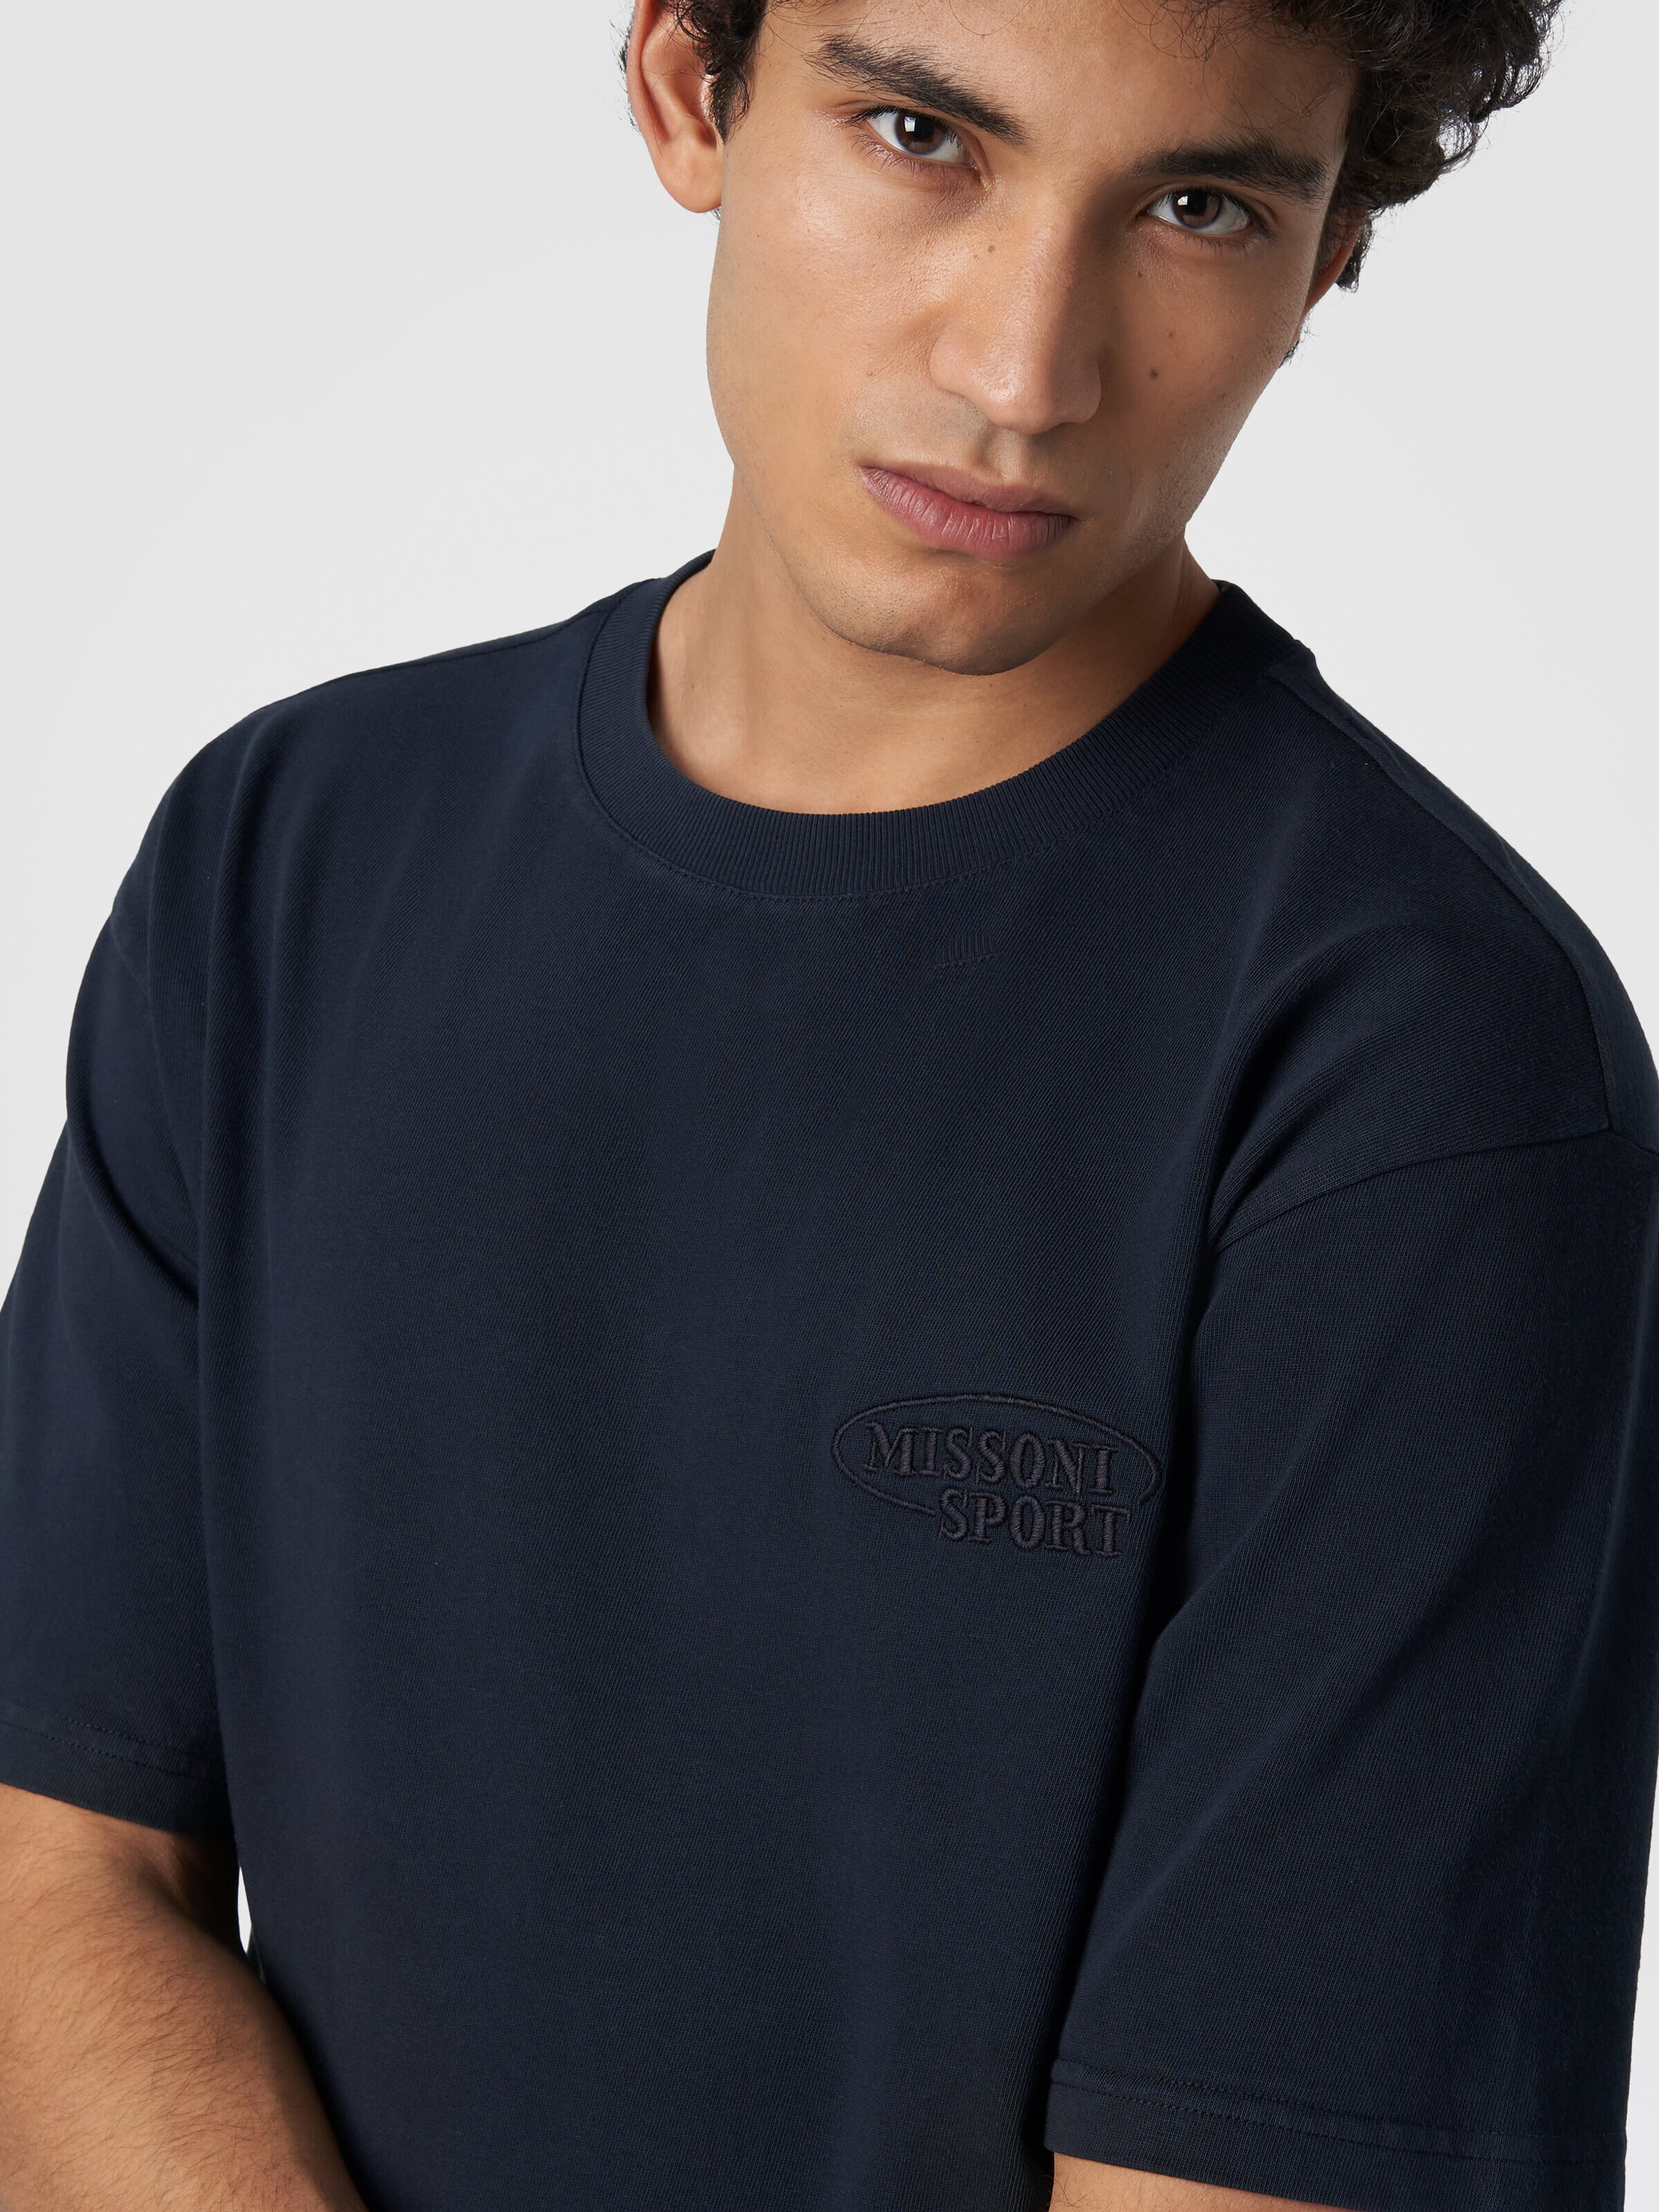 Crew-neck T-shirt in cotton with logo, Navy Blue  - 4